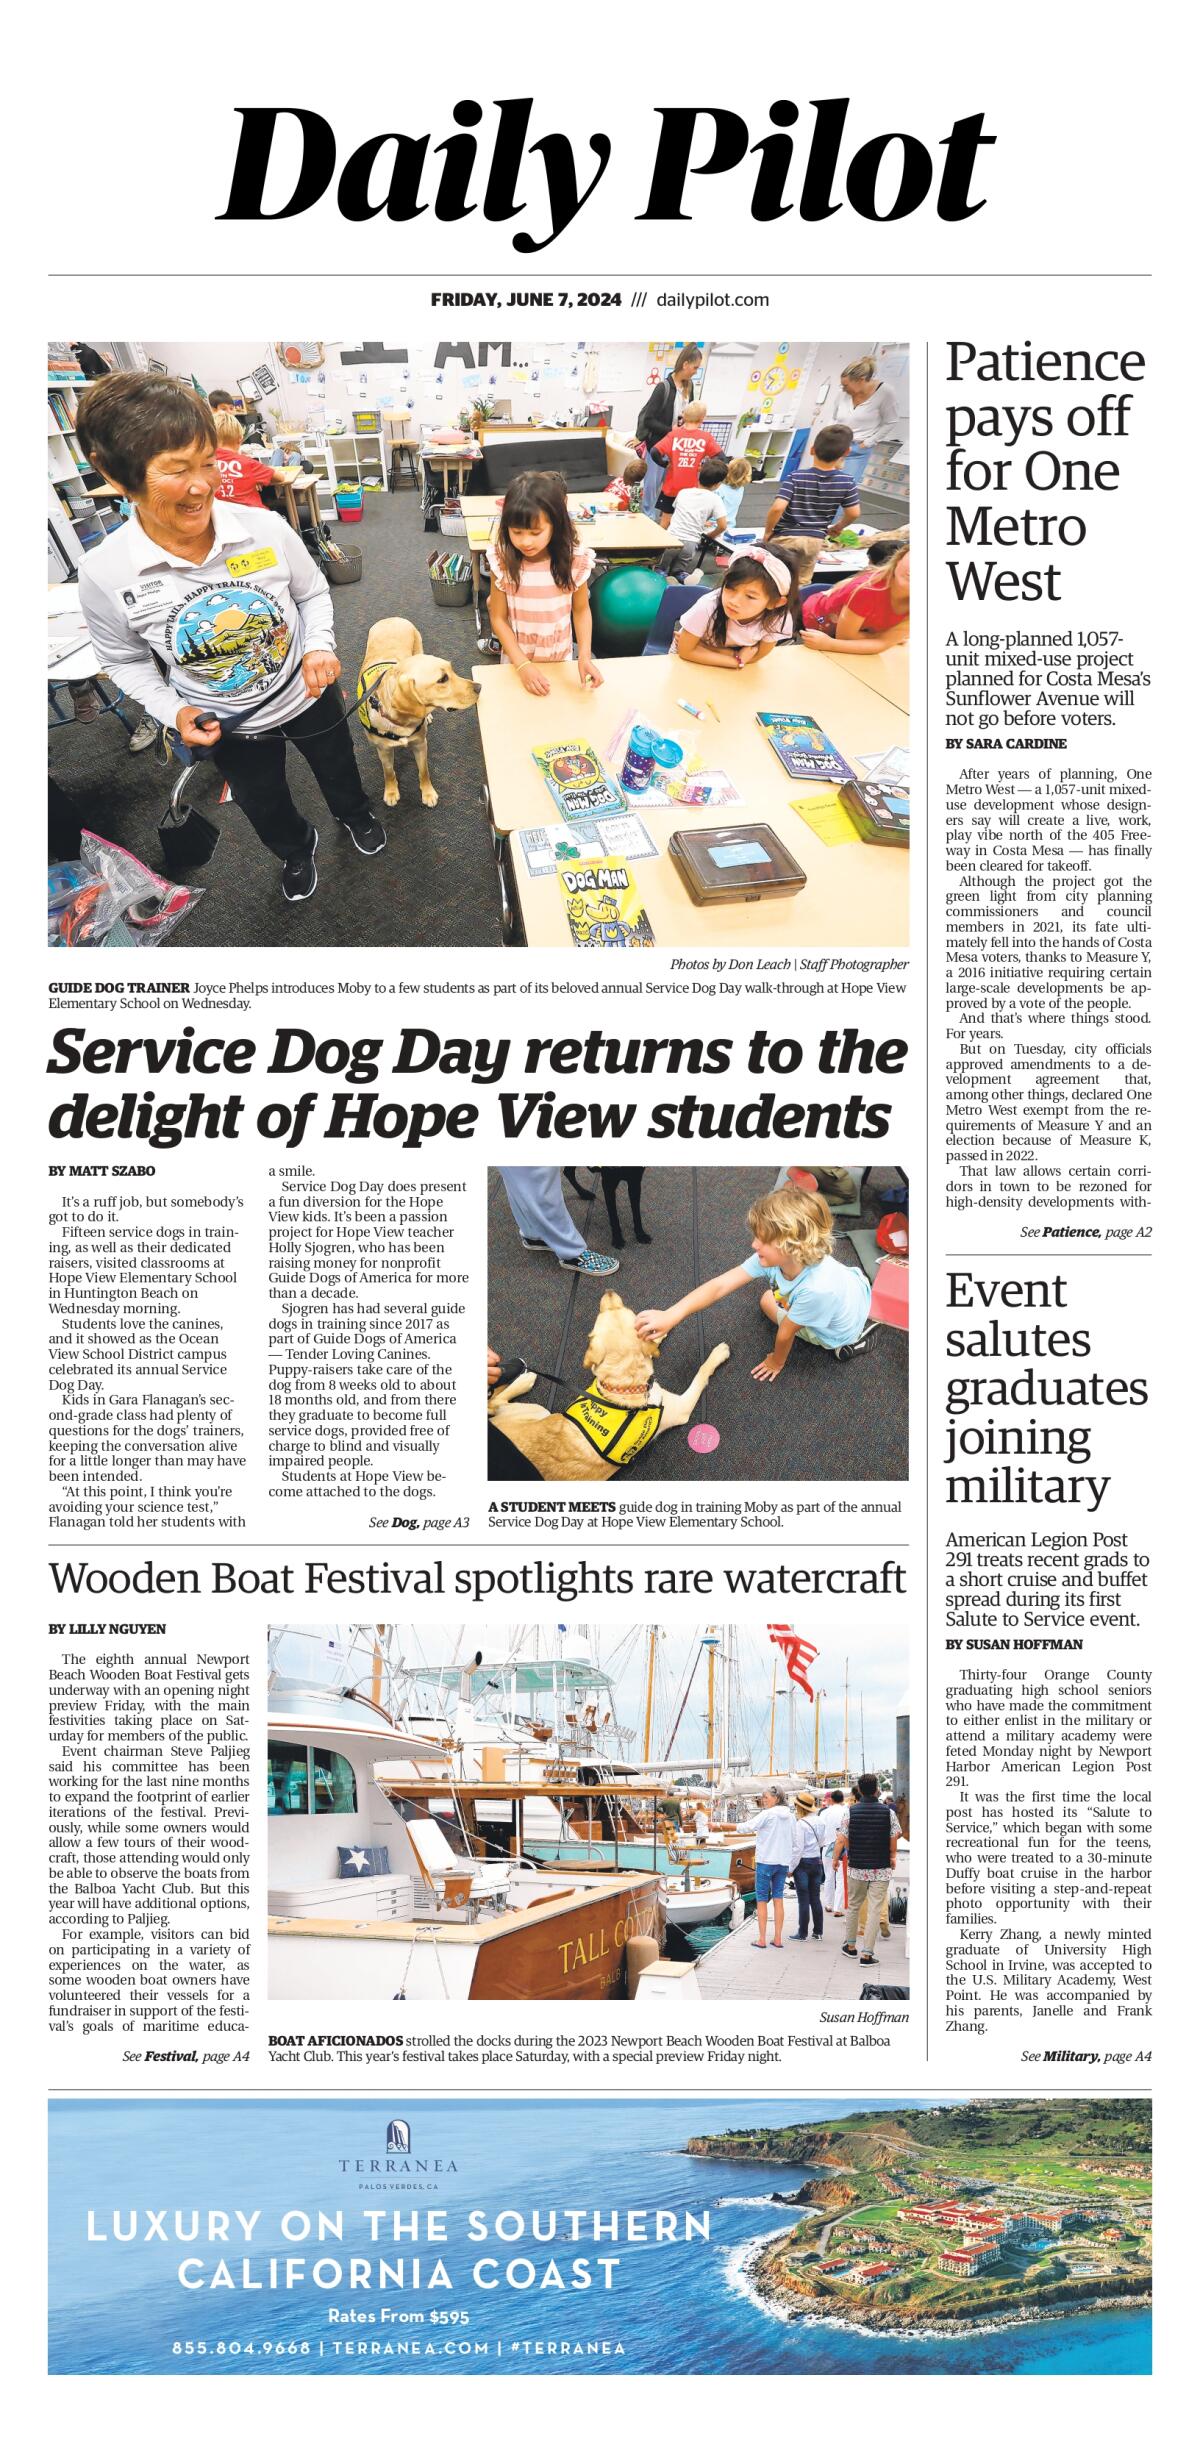 Front page of the Daily Pilot e-newspaper for Friday, June 7, 2024.